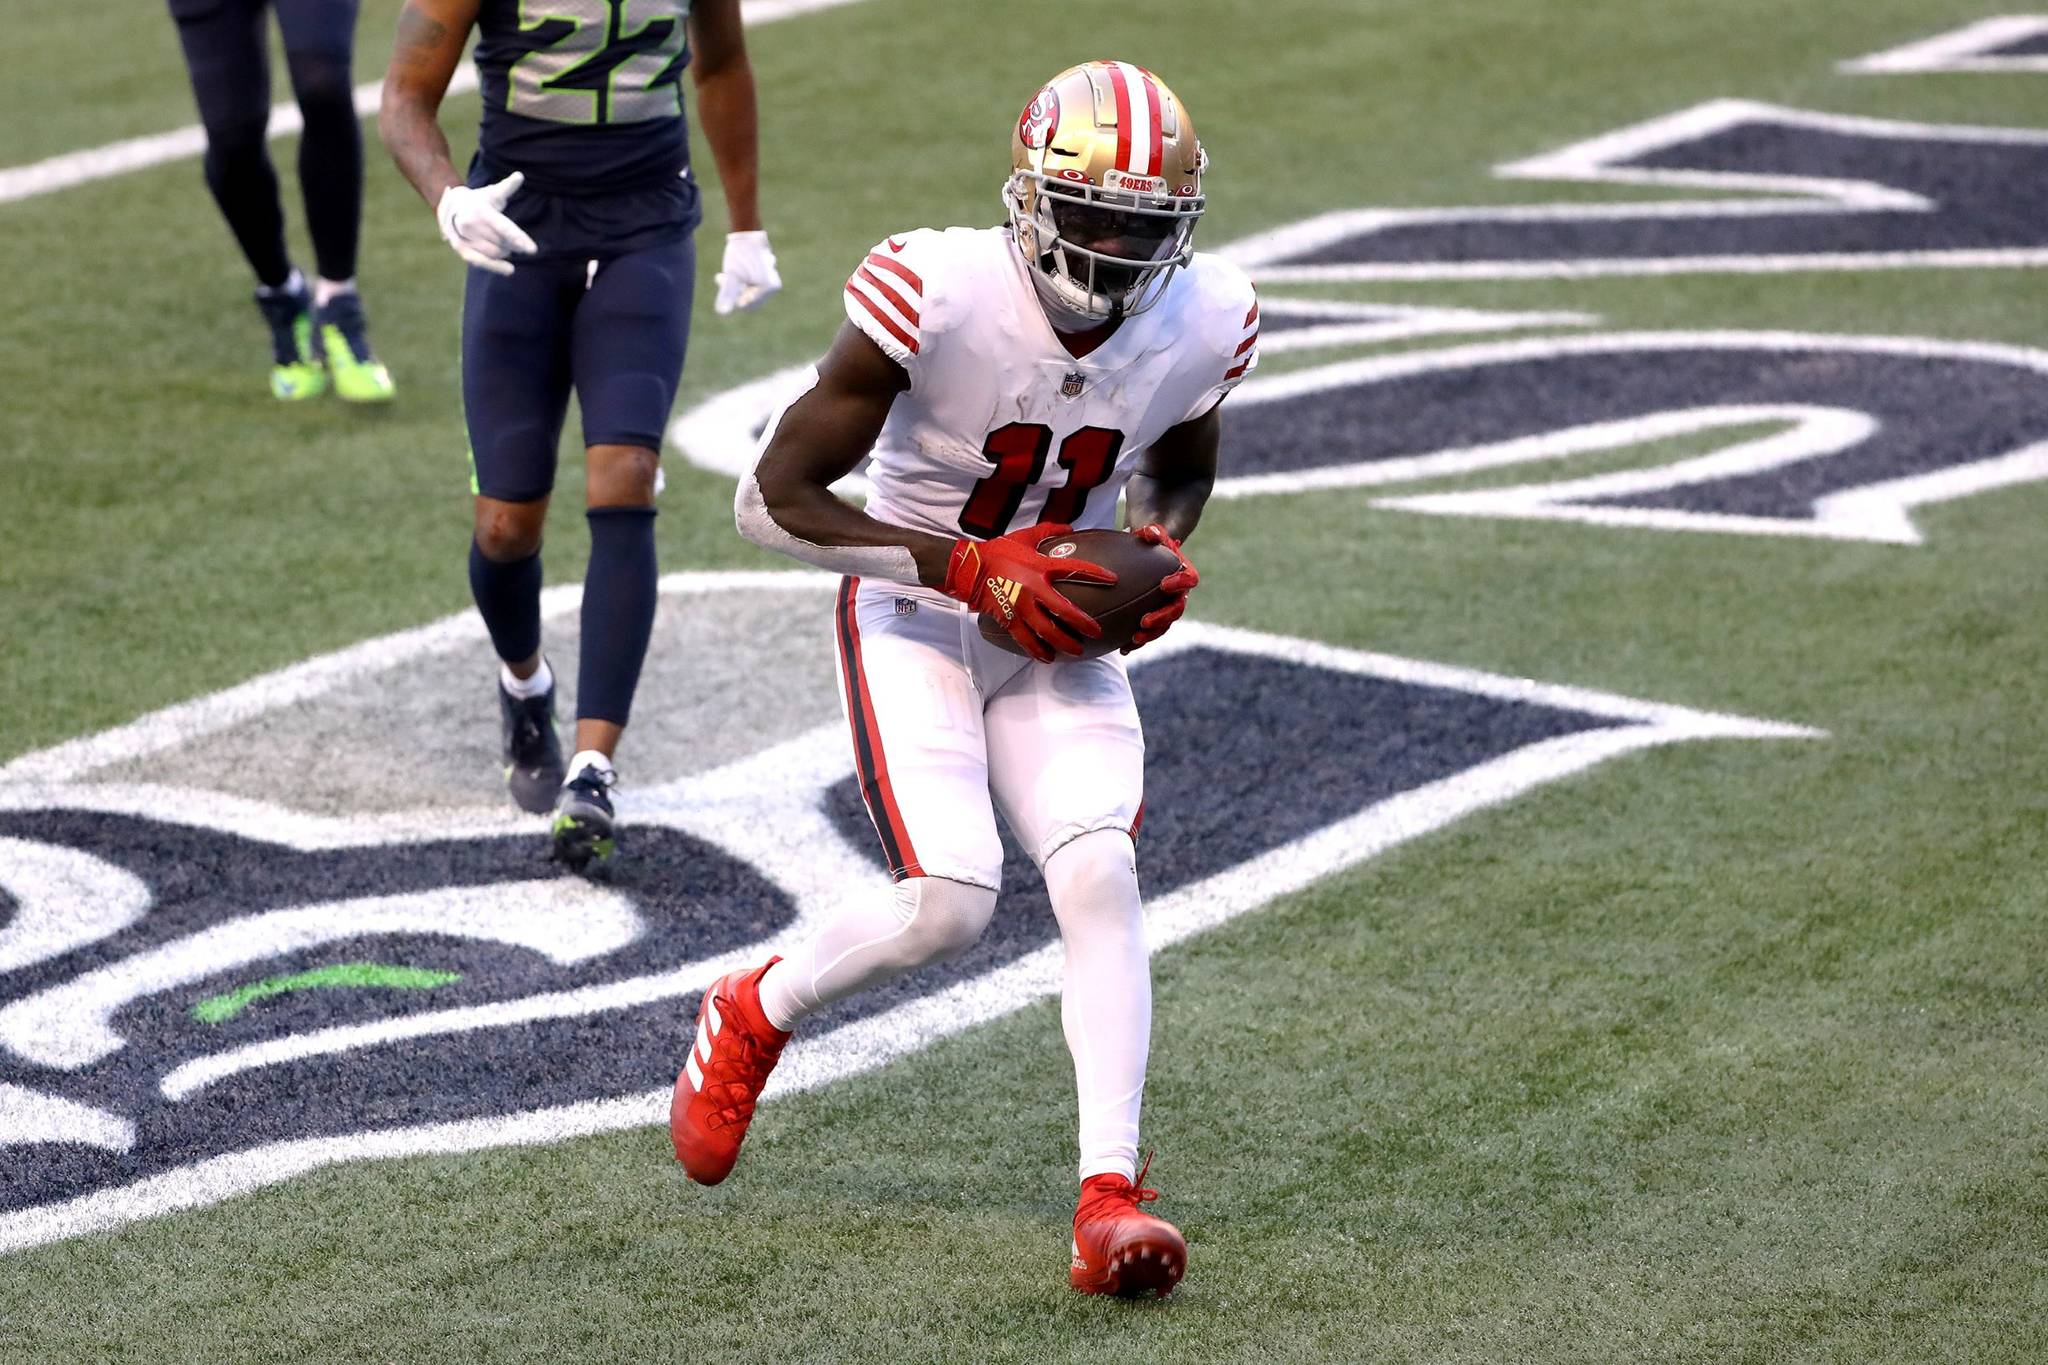 Abbie Parr/Getty Images 
San Francisco 49ers wide receiver Brandon Aiyuk scores a touchdown in the fourth quarter against the Seattle Seahawks in Seattle on Nov. 1. The wide receiver has become one of the 49ers’ top targets in his rookie year.